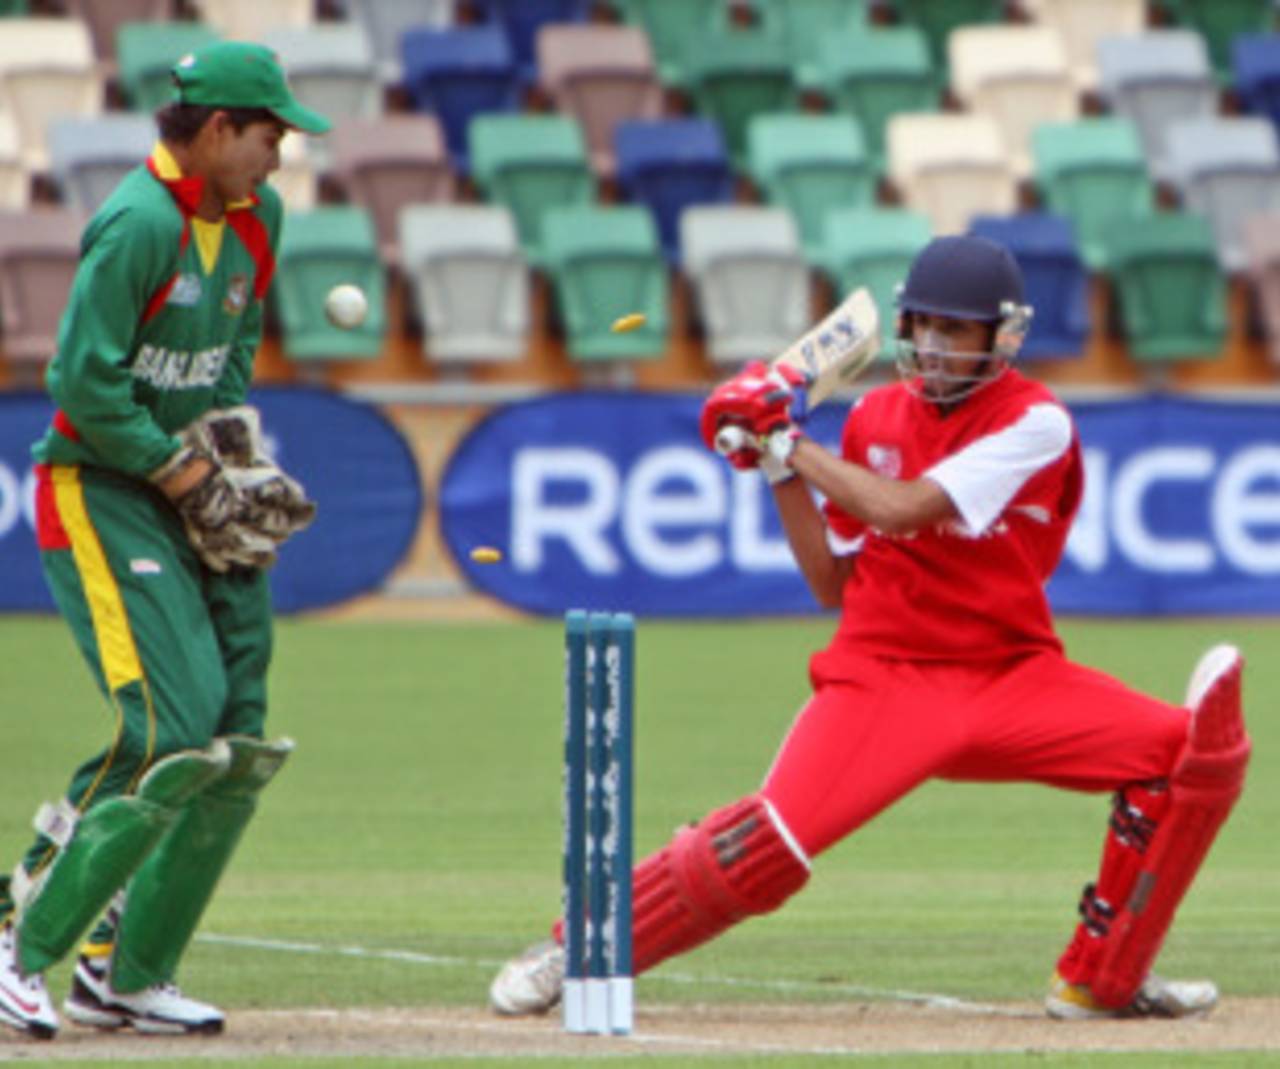 Hong Kong U19's Waqas Barkat is bowled trying to reverse-sweep, Bangladesh Under-19s v Hong Kong Under-19s, 9th Place Play-off Quarter-Final, ICC Under-19 World Cup, Napier, January 24, 2010